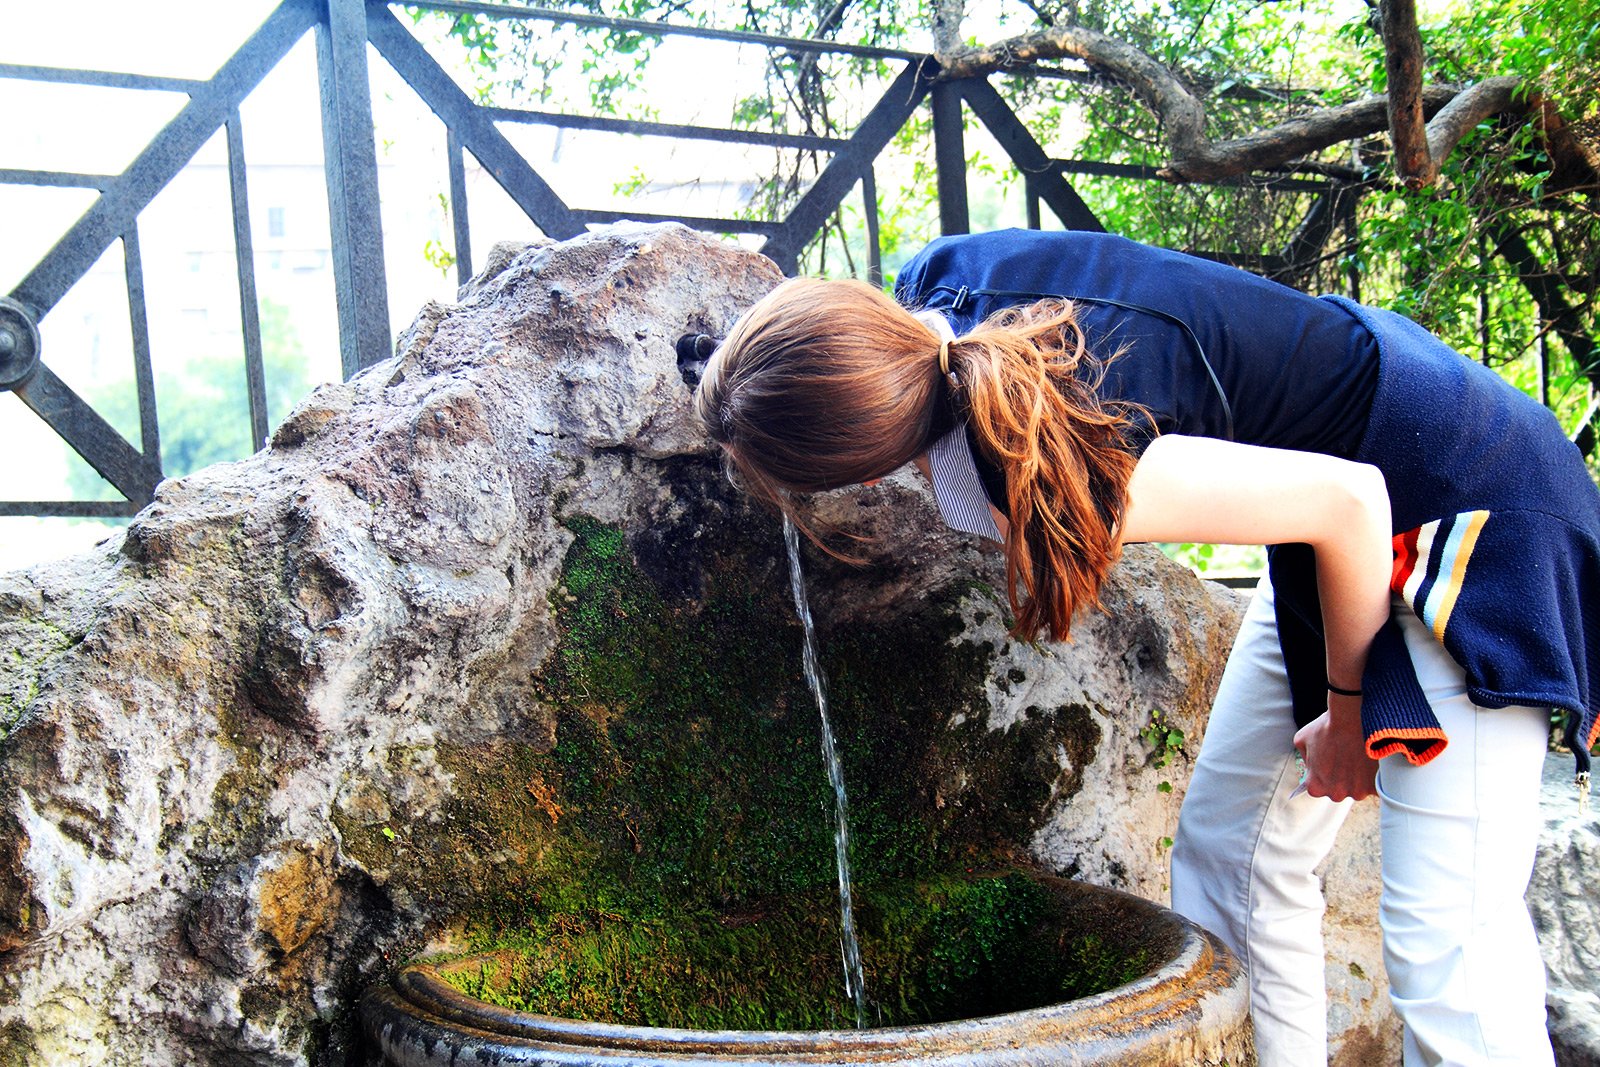 How to drink water from fontanelle in Rome